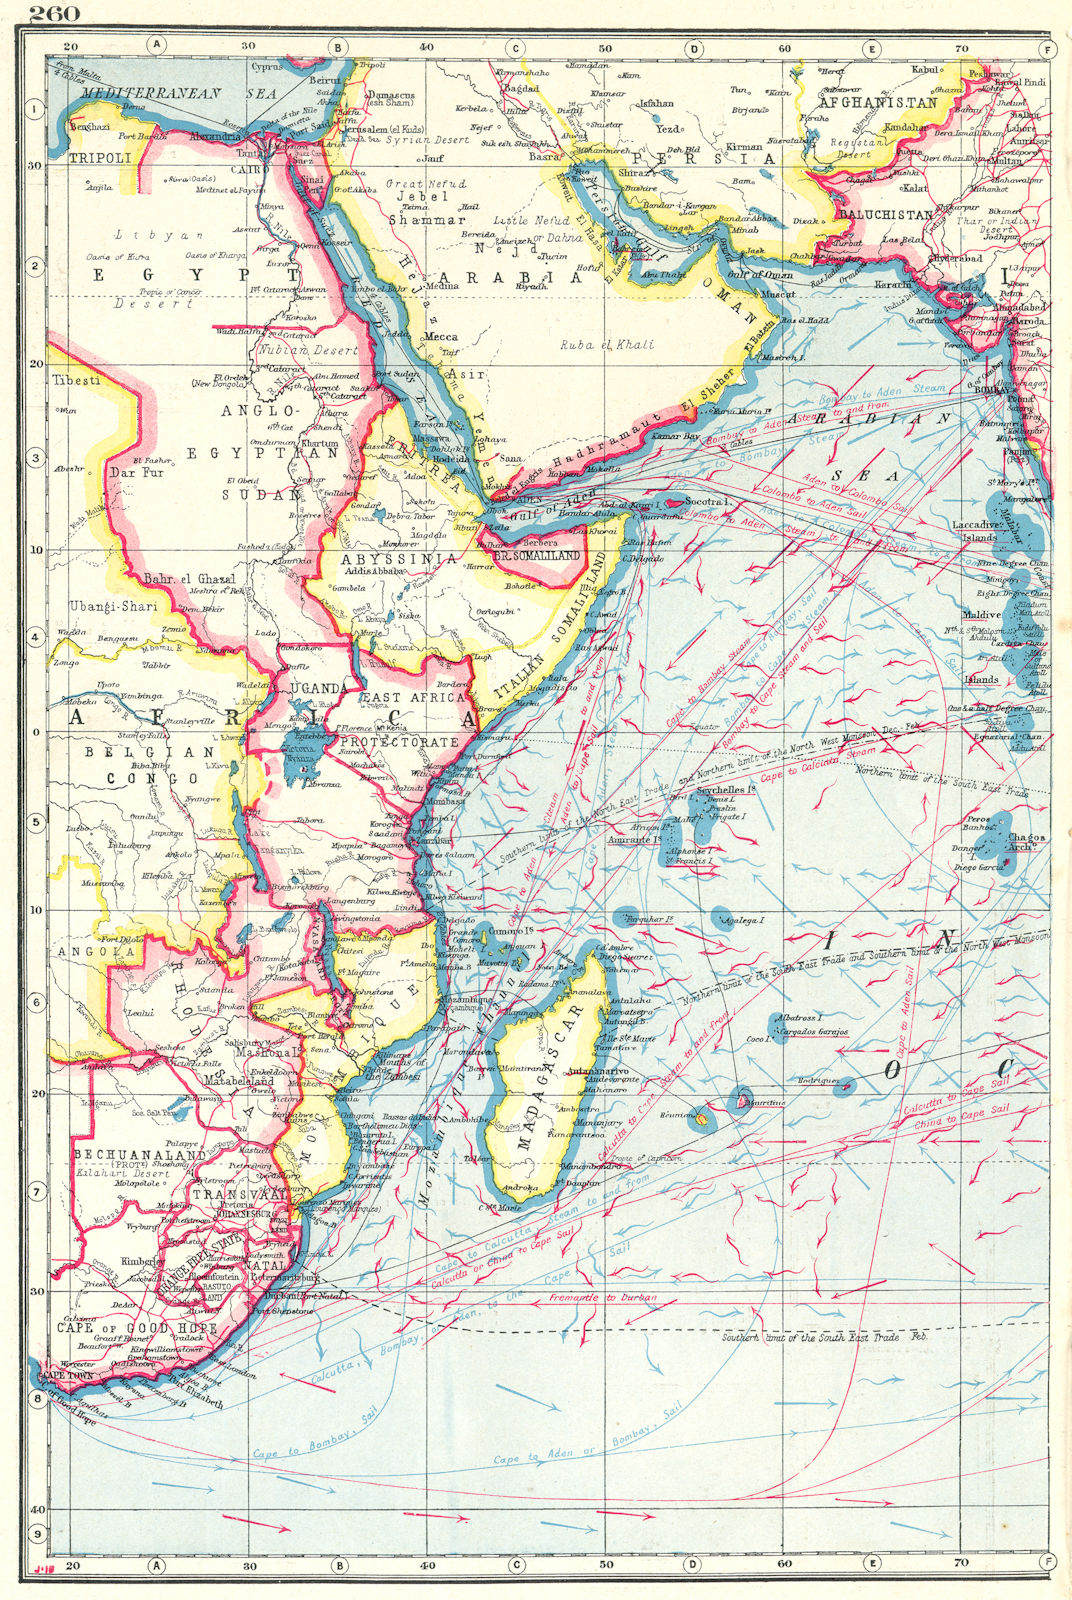 INDIAN OCEAN WEST. Africa. British Empire.Shows winds & ocean currents 1920 map